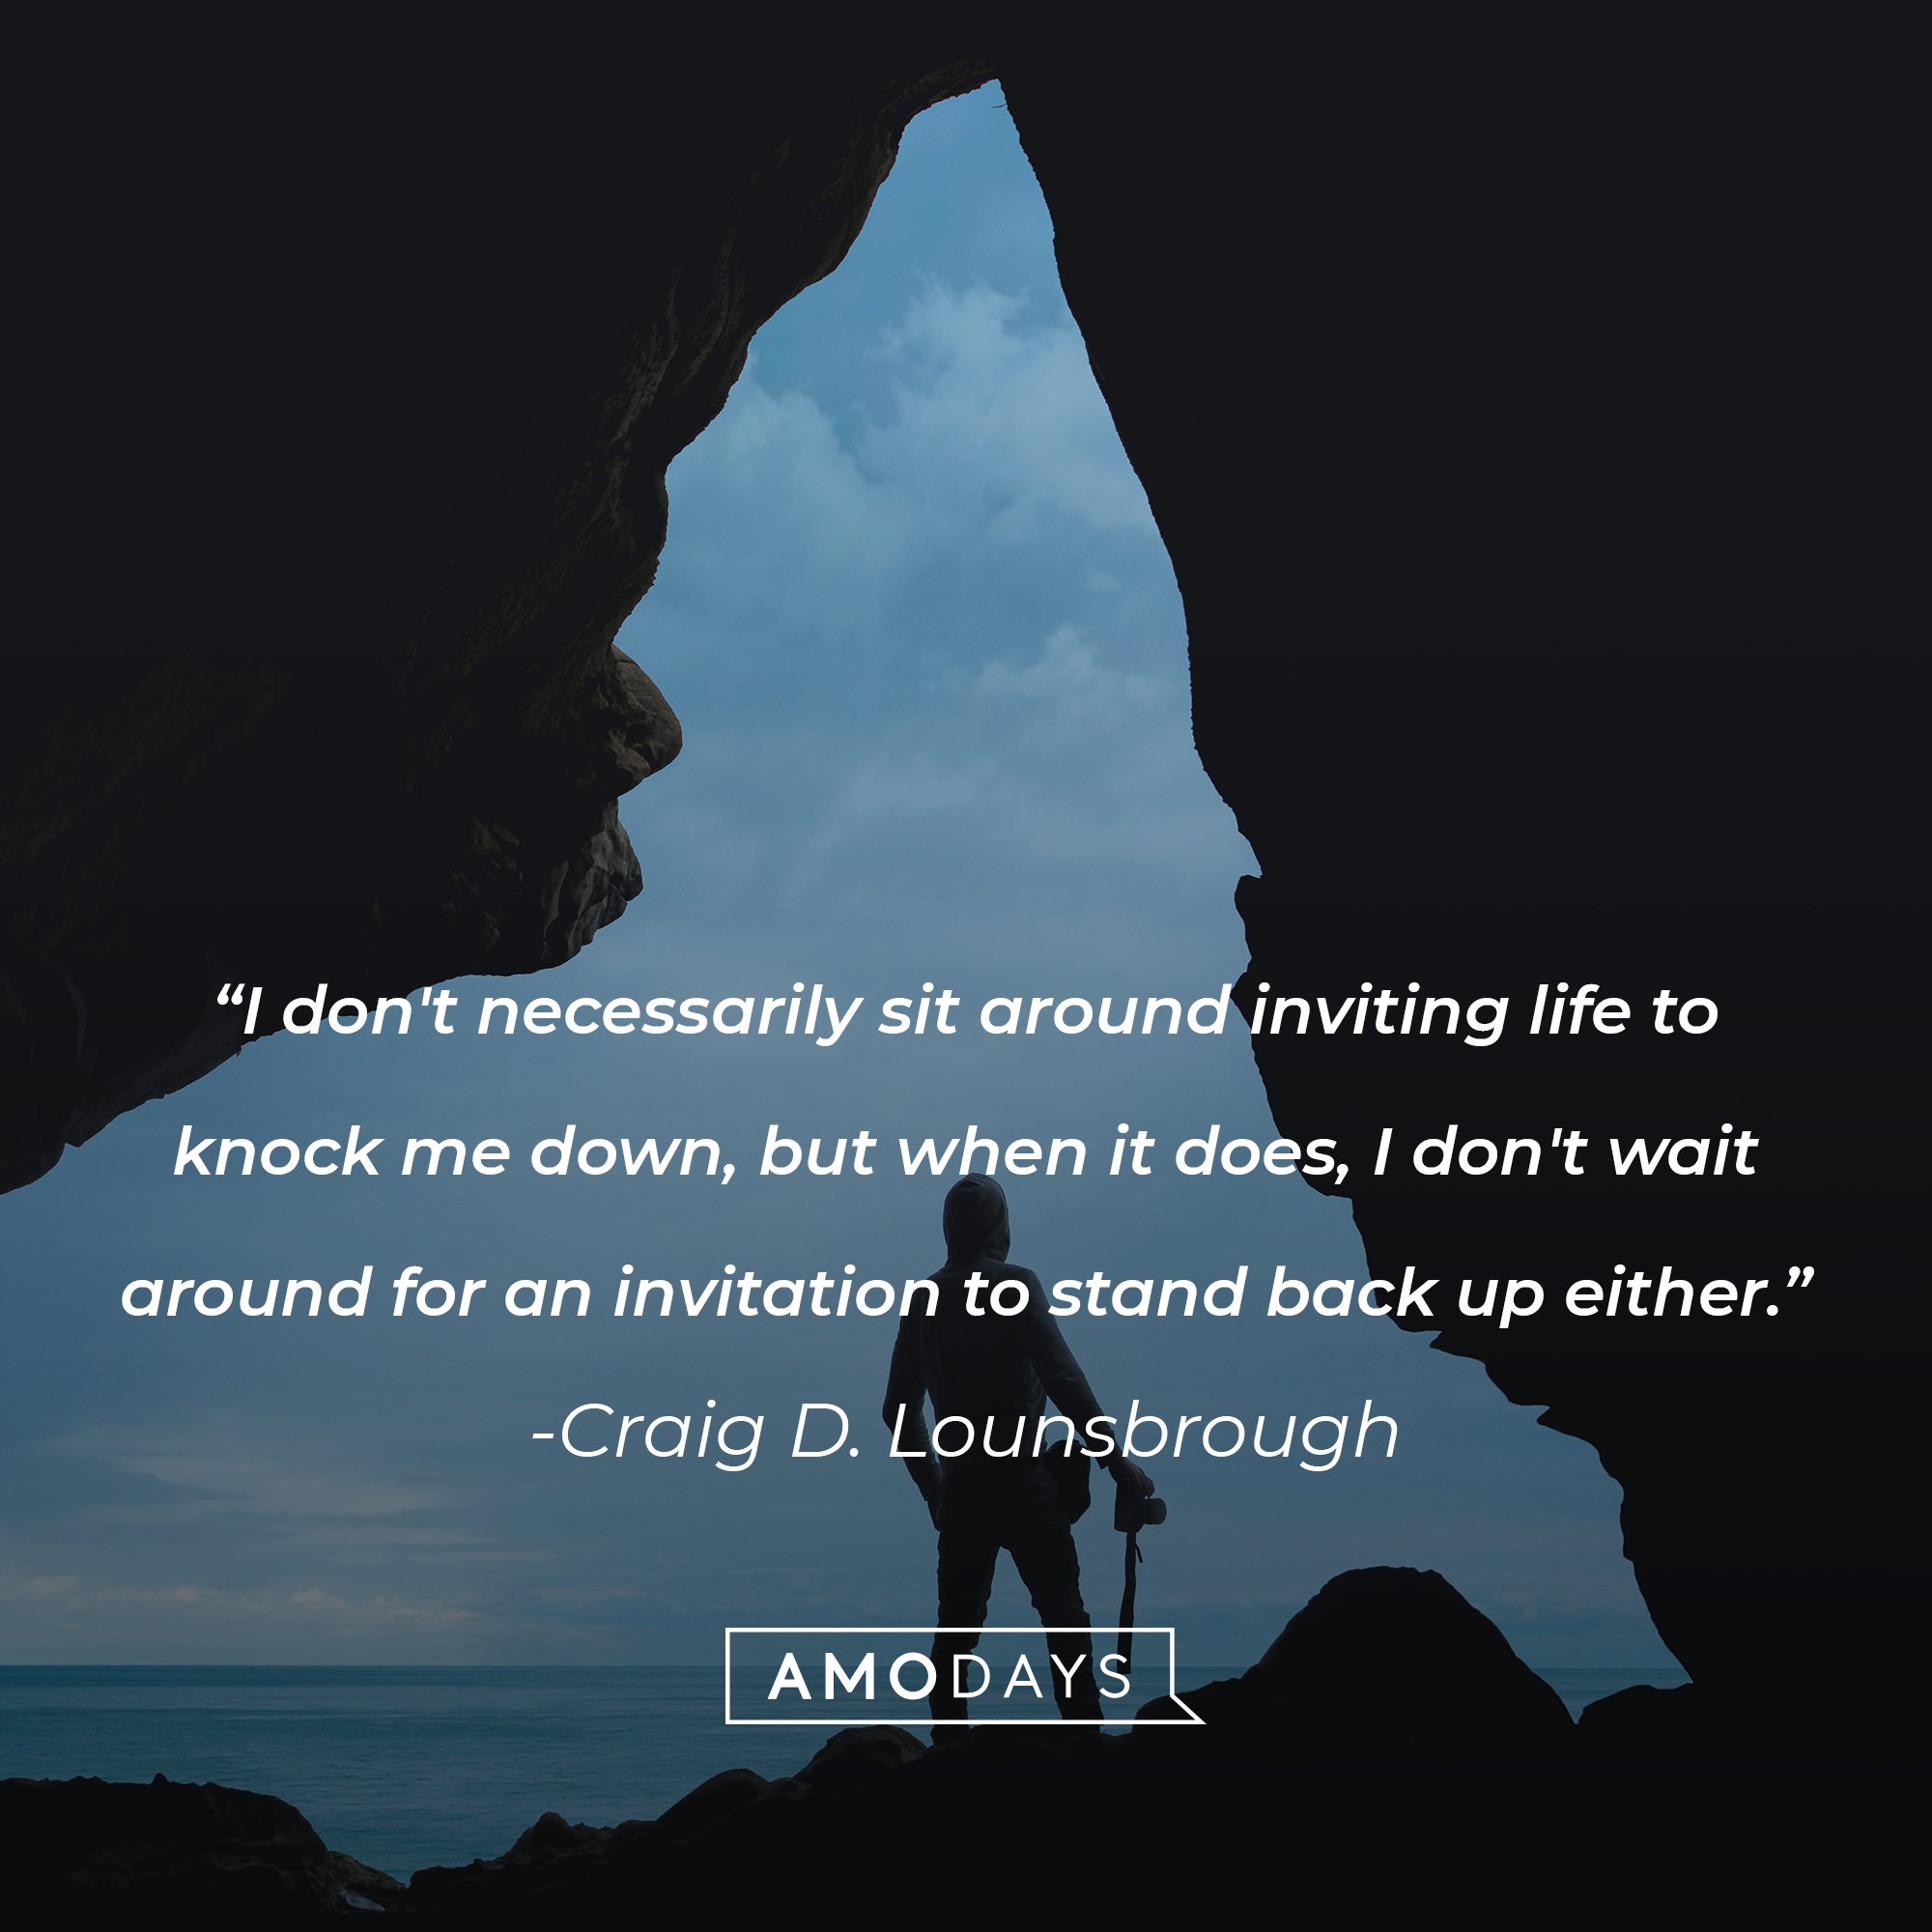 Craig D. Lounsbrough's quote: "I don't necessarily sit around inviting life to knock me down, but when it does, I don't wait around for an invitation to stand back up either." | Image: AmoDays